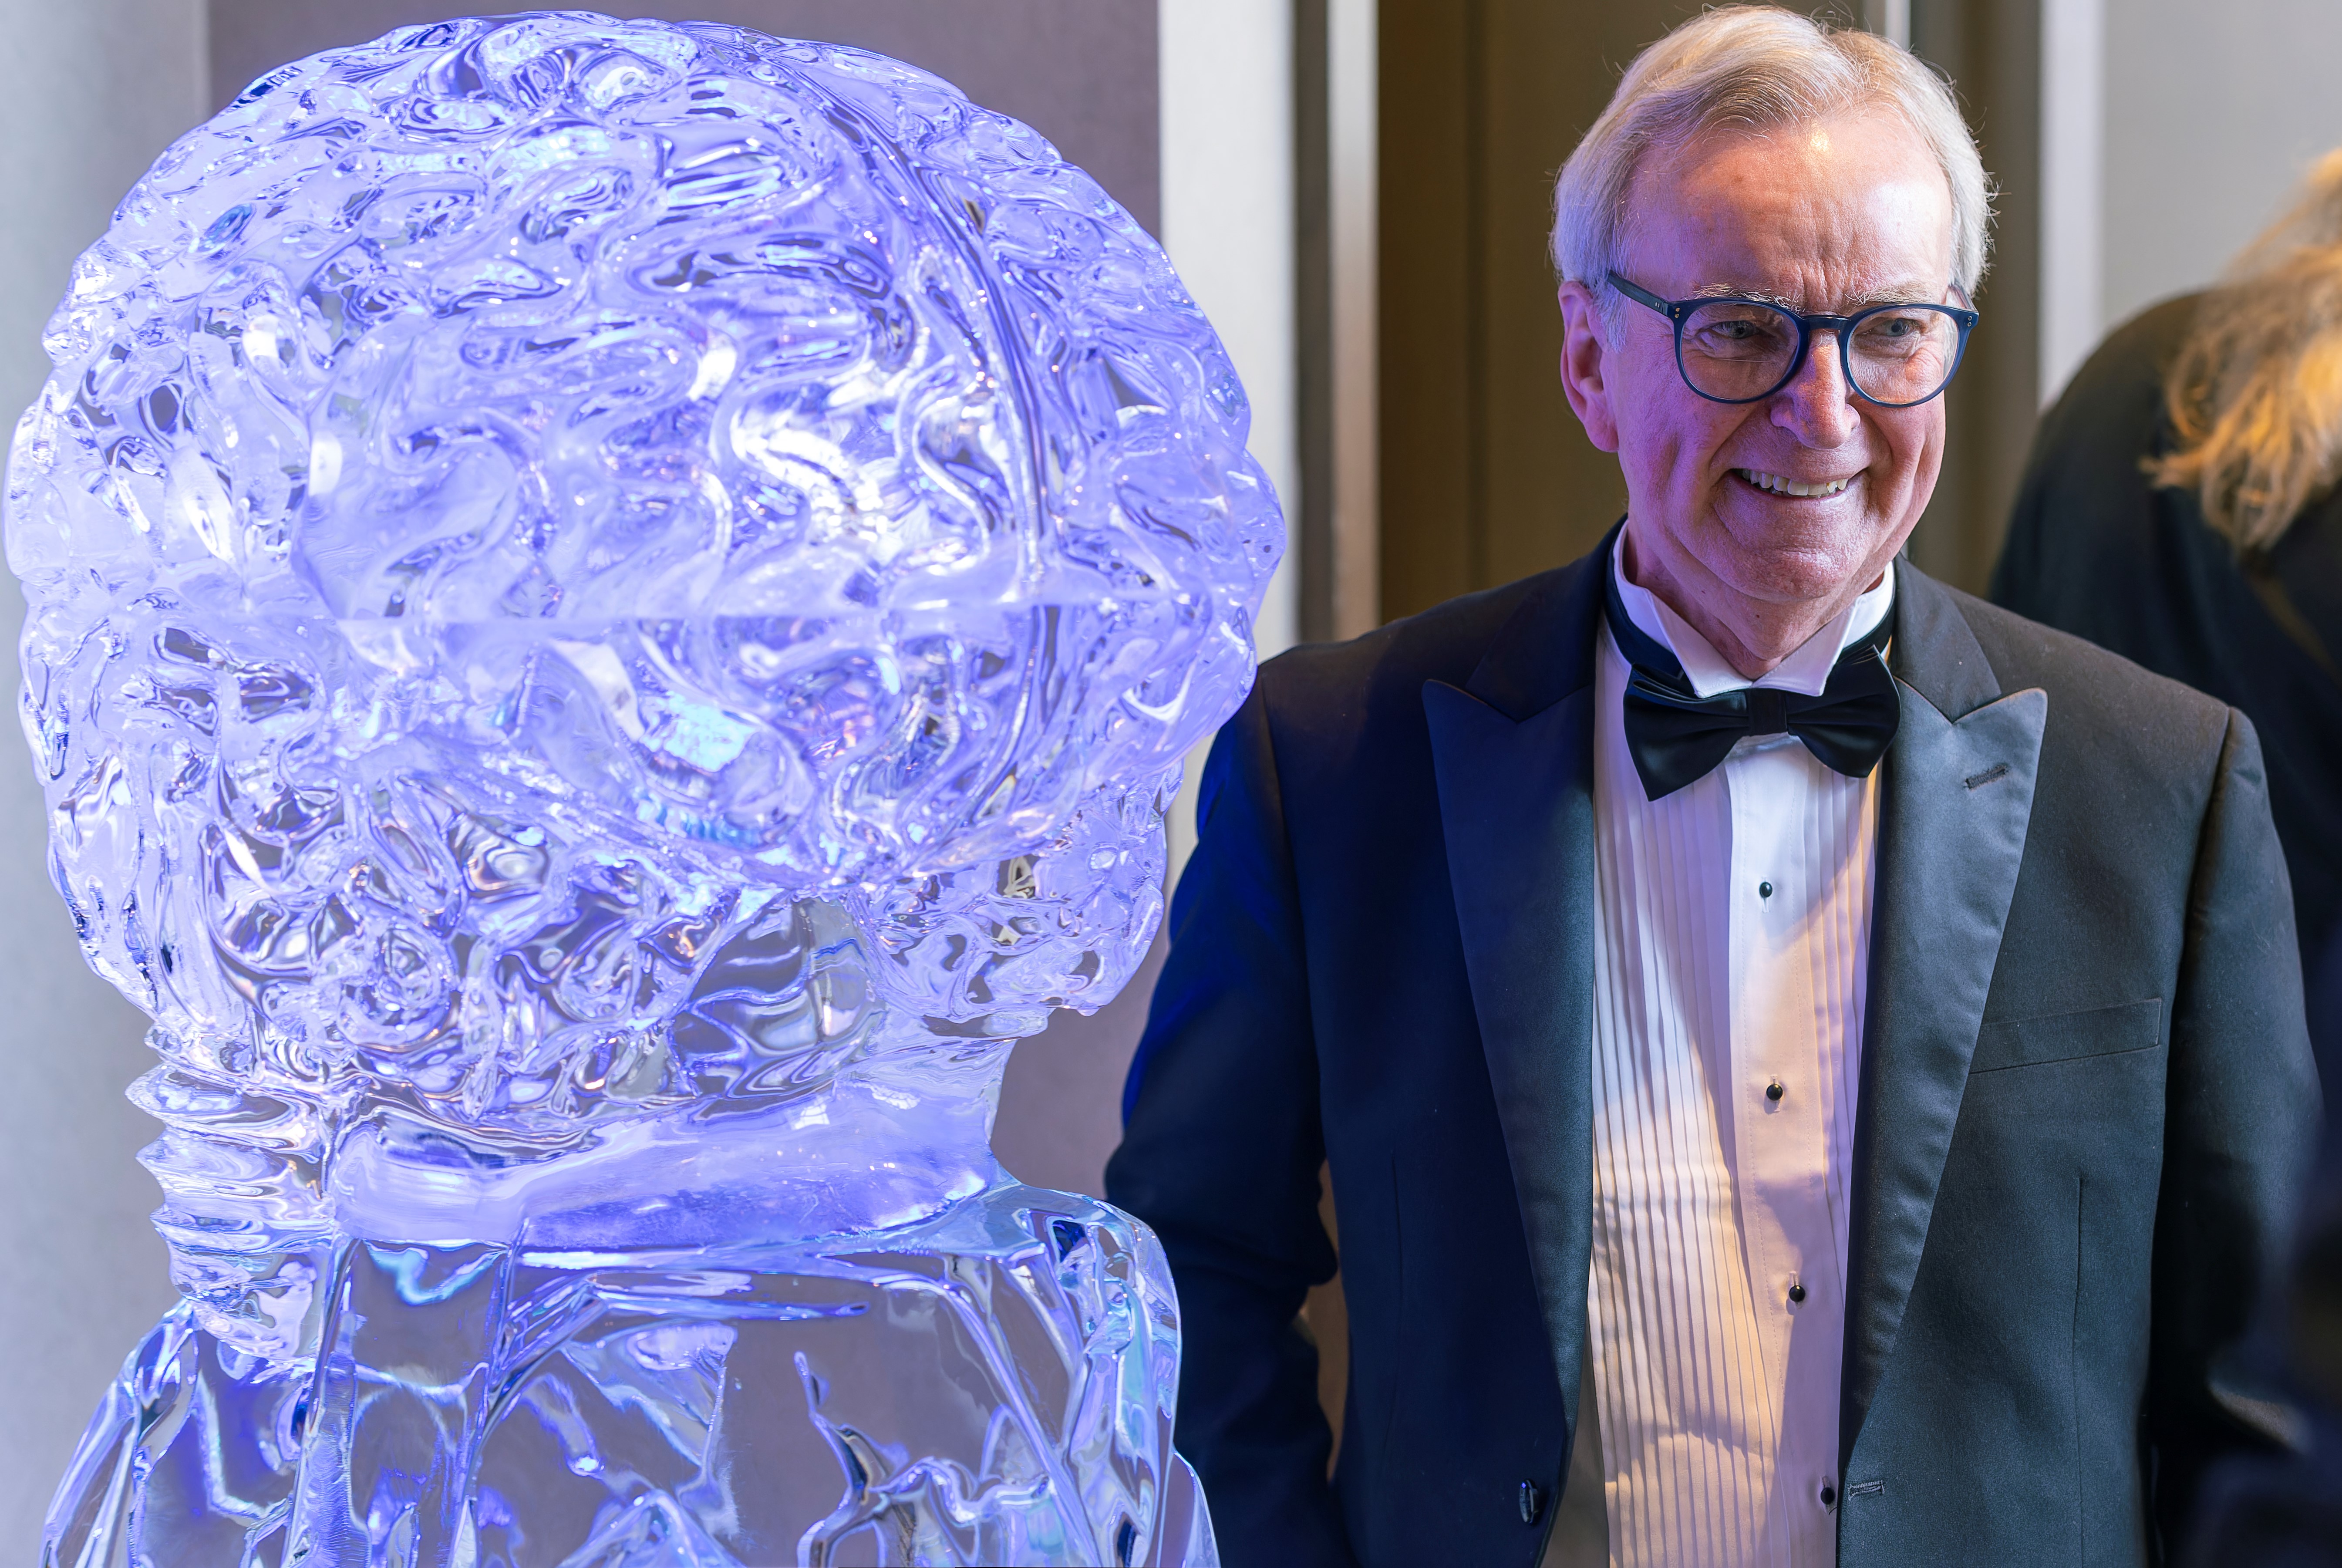 Dr. Tibbs and the Ice Brain sculpture